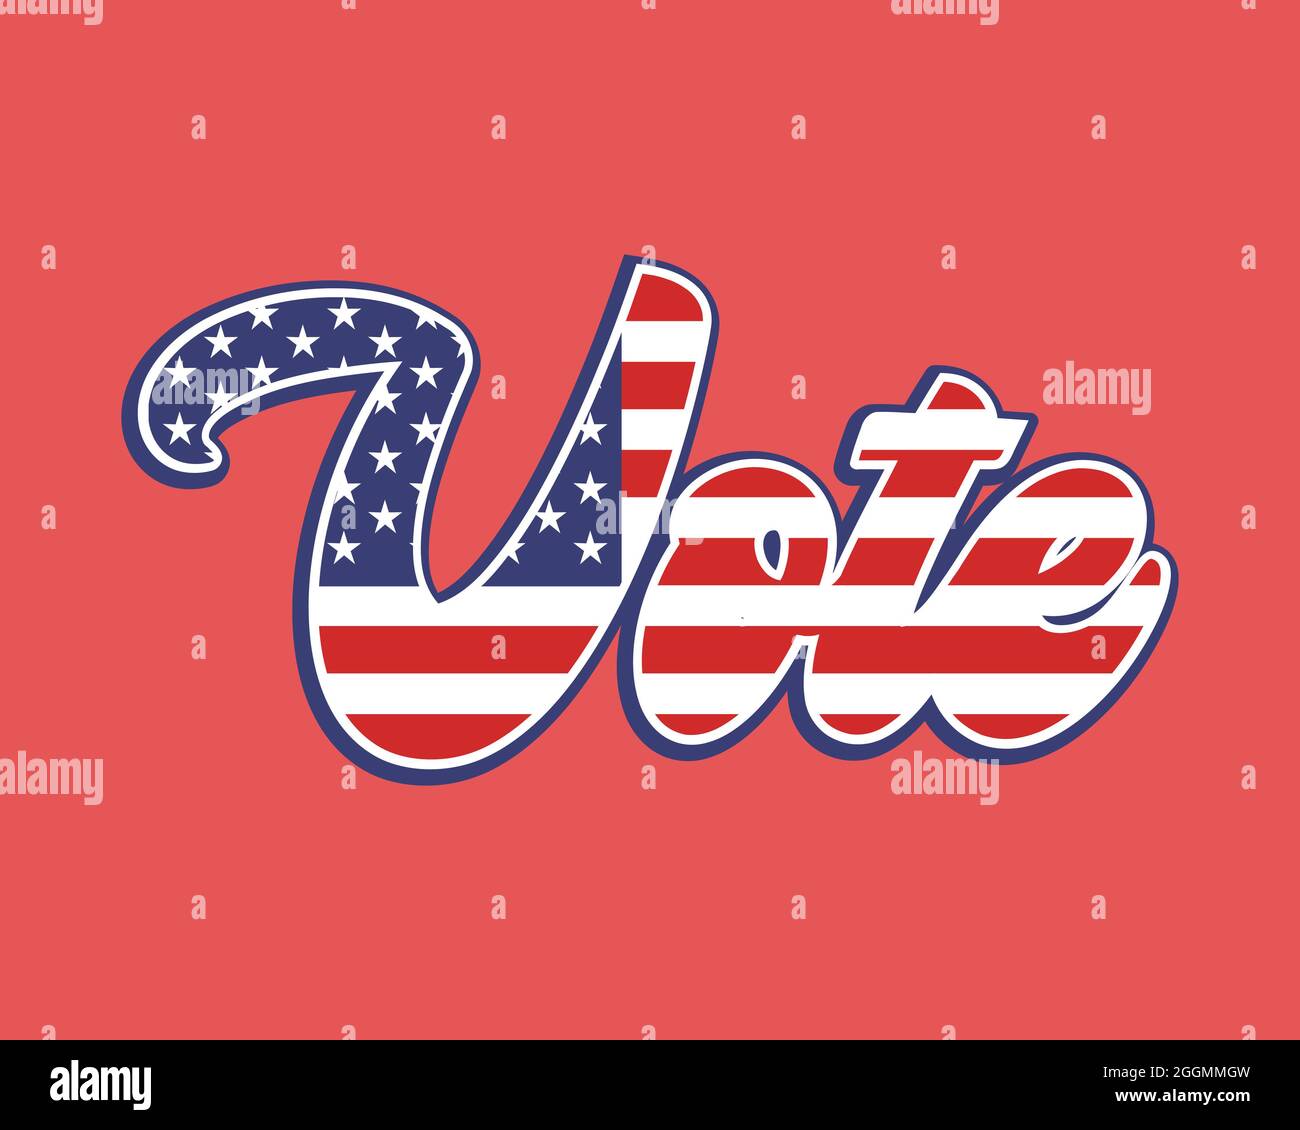 Vote election sign, midterm presidential voting banner with red background, republican candidate, politics, political, United States of America, Ameri Stock Photo